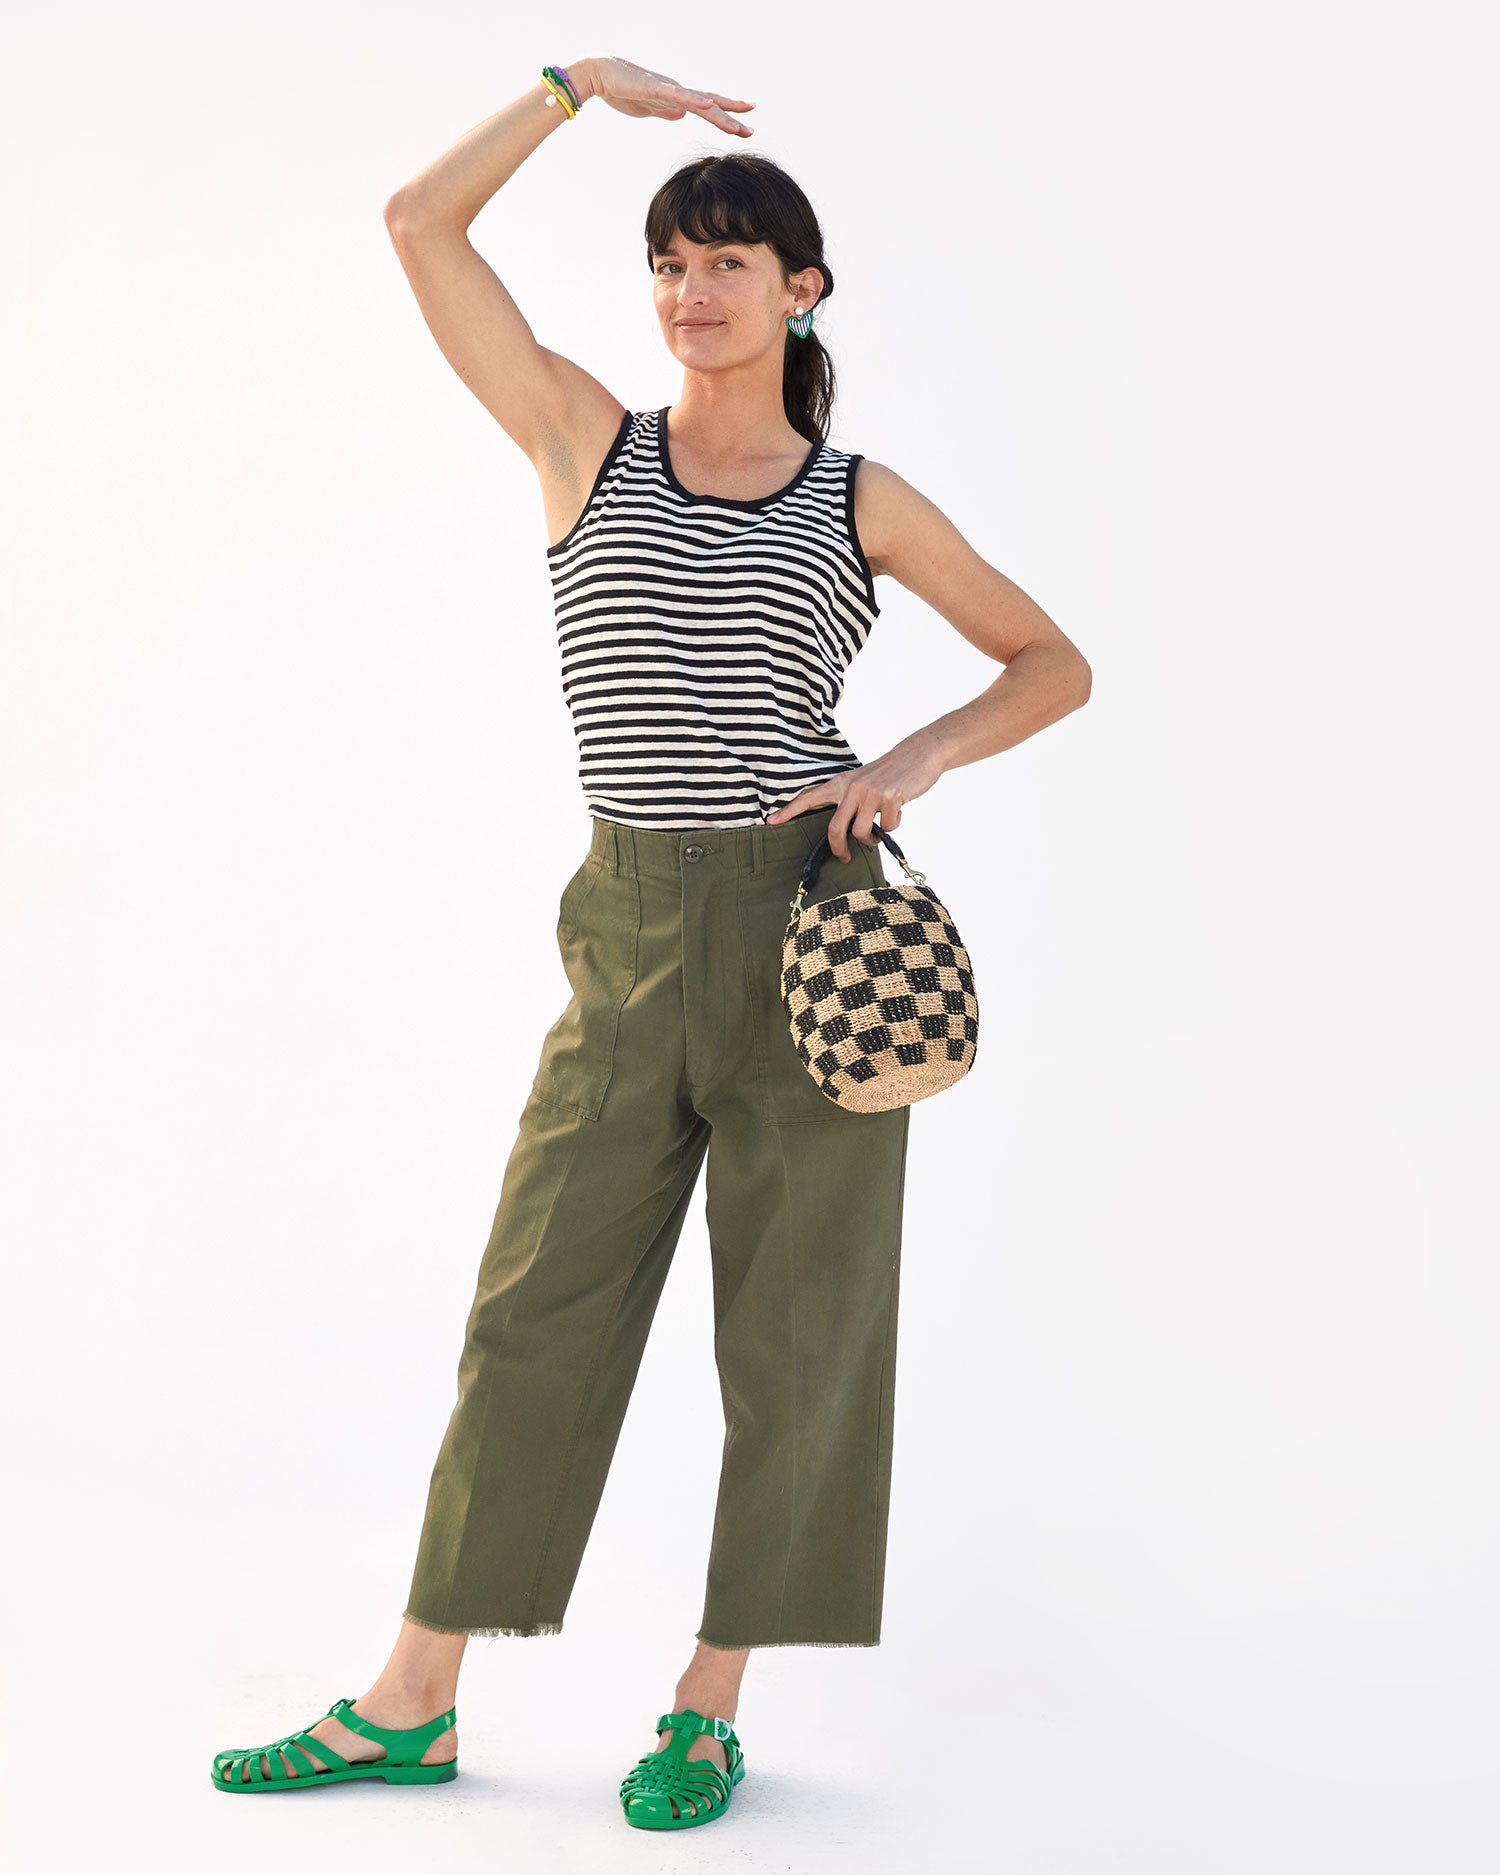 Danica wearing the Gazon Sun Jelly Sandals with army green pants  and a striped tank top